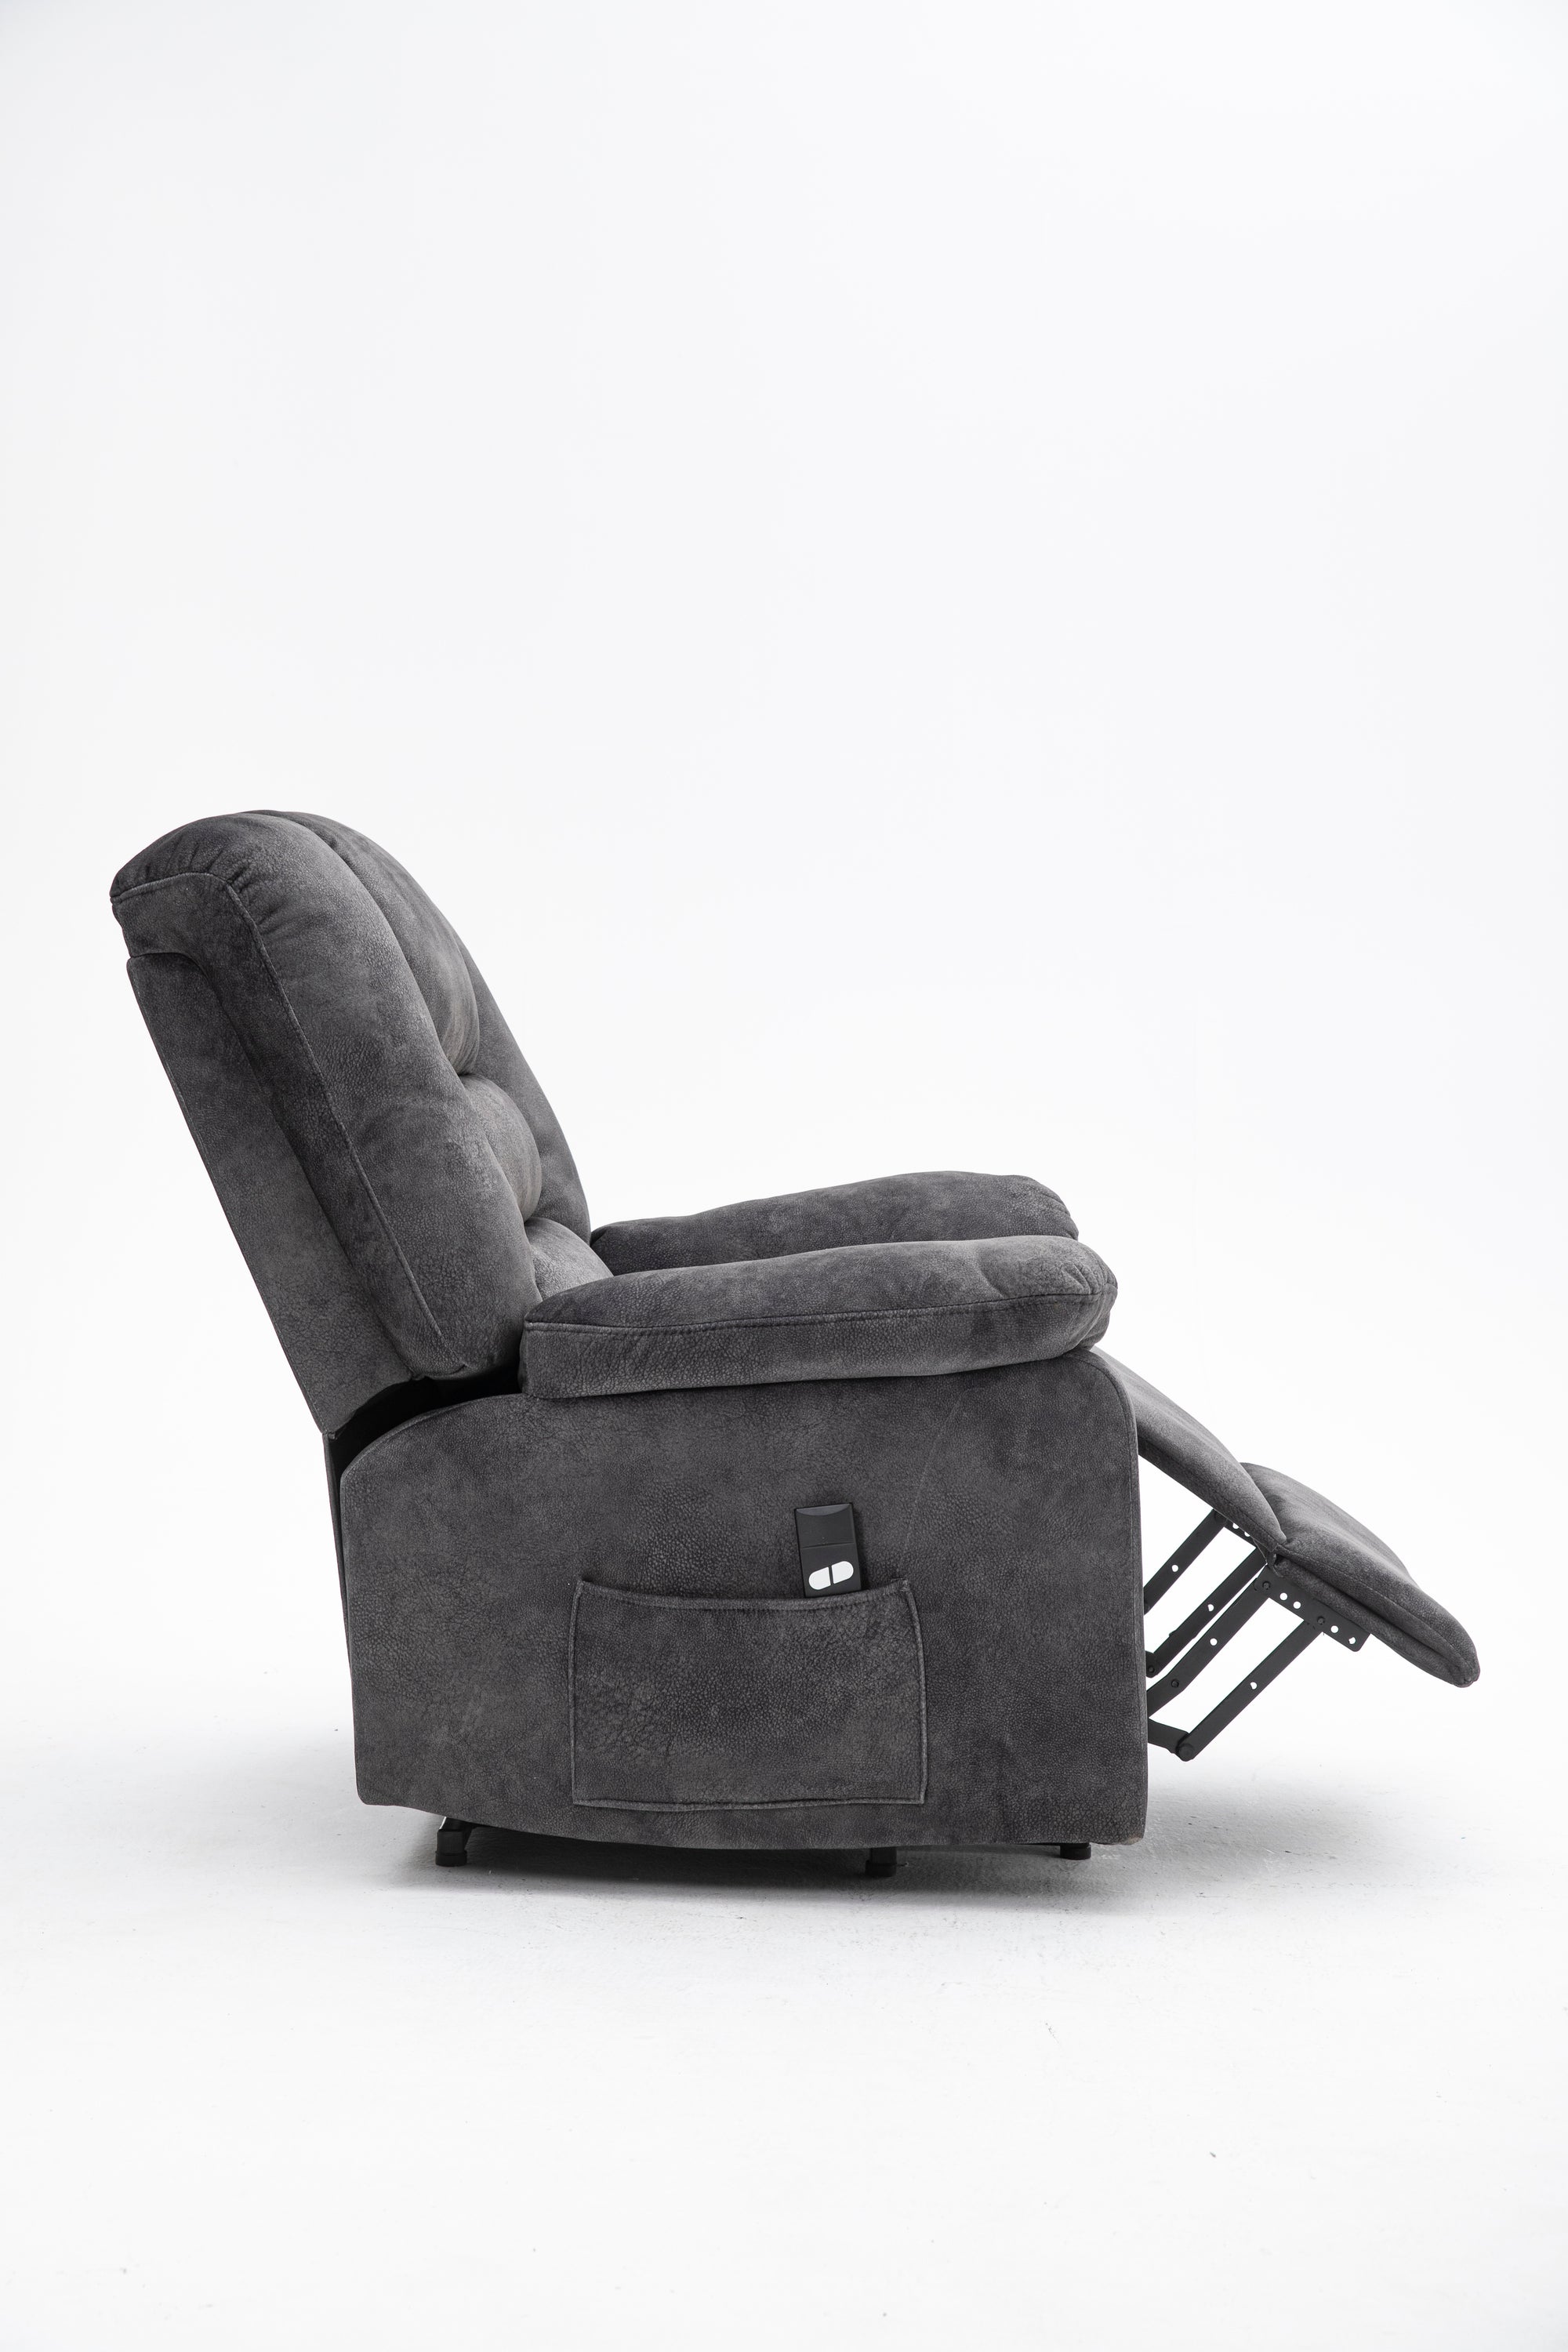 Remote Control Recliner Sofa Chair for Elderly By: Alabama Beds